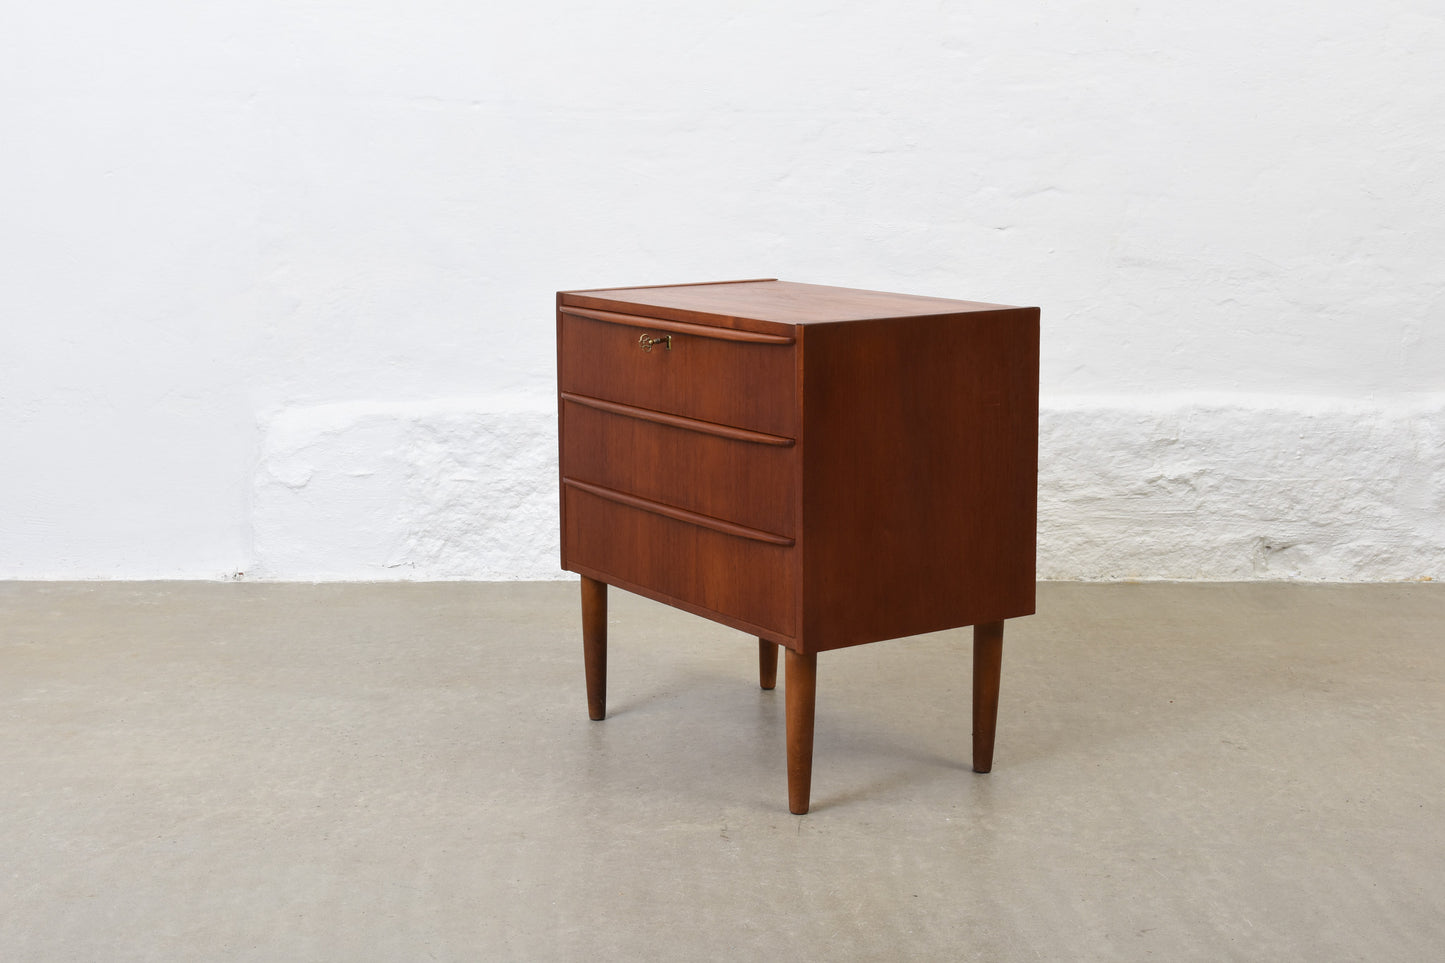 1960s low teak chest with lipped handles